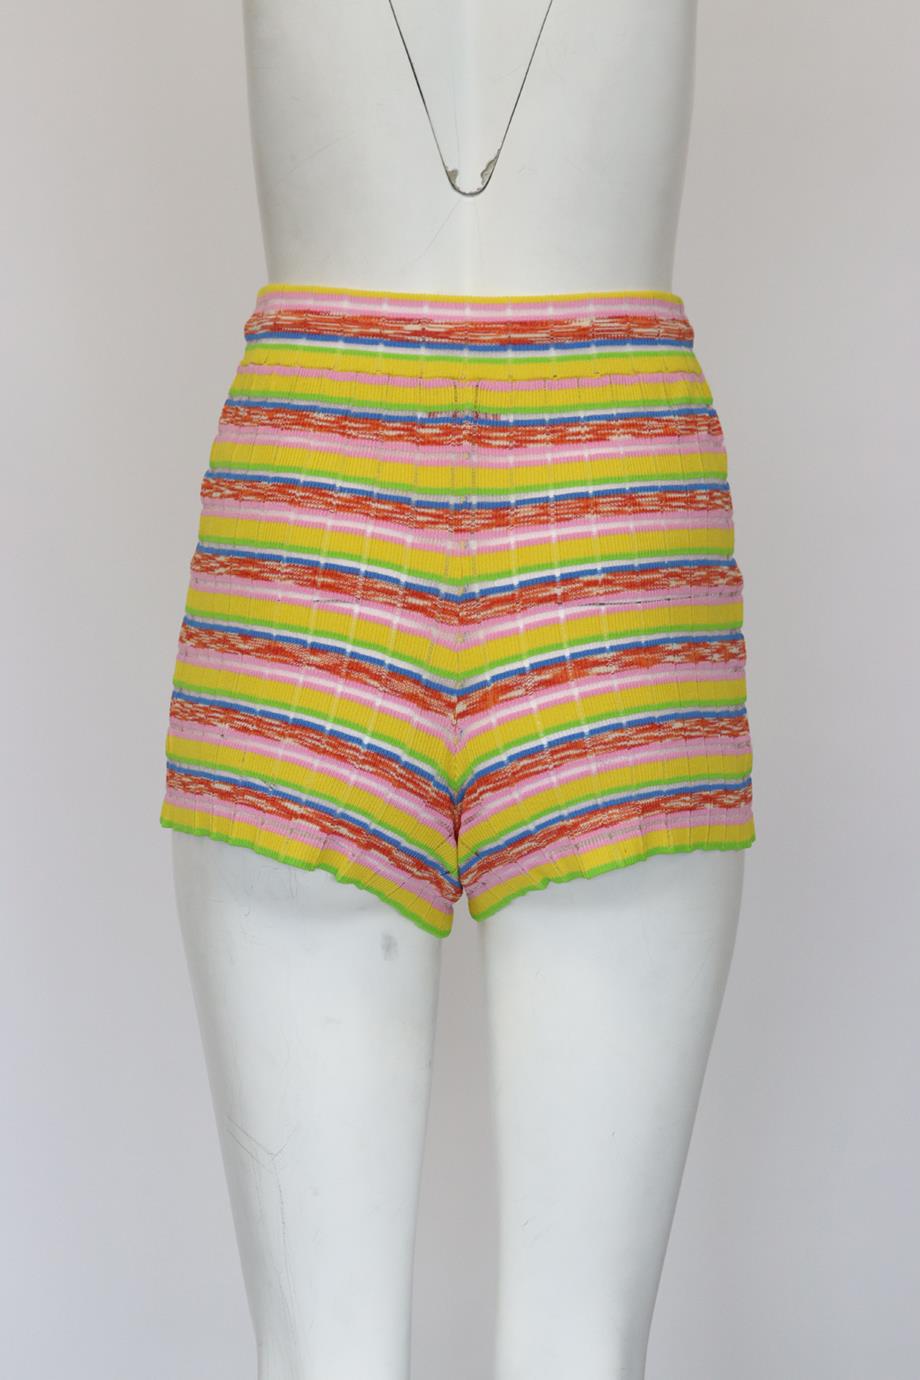 SOLID AND STRIPED STRIPED KNIT SHORTS XSMALL